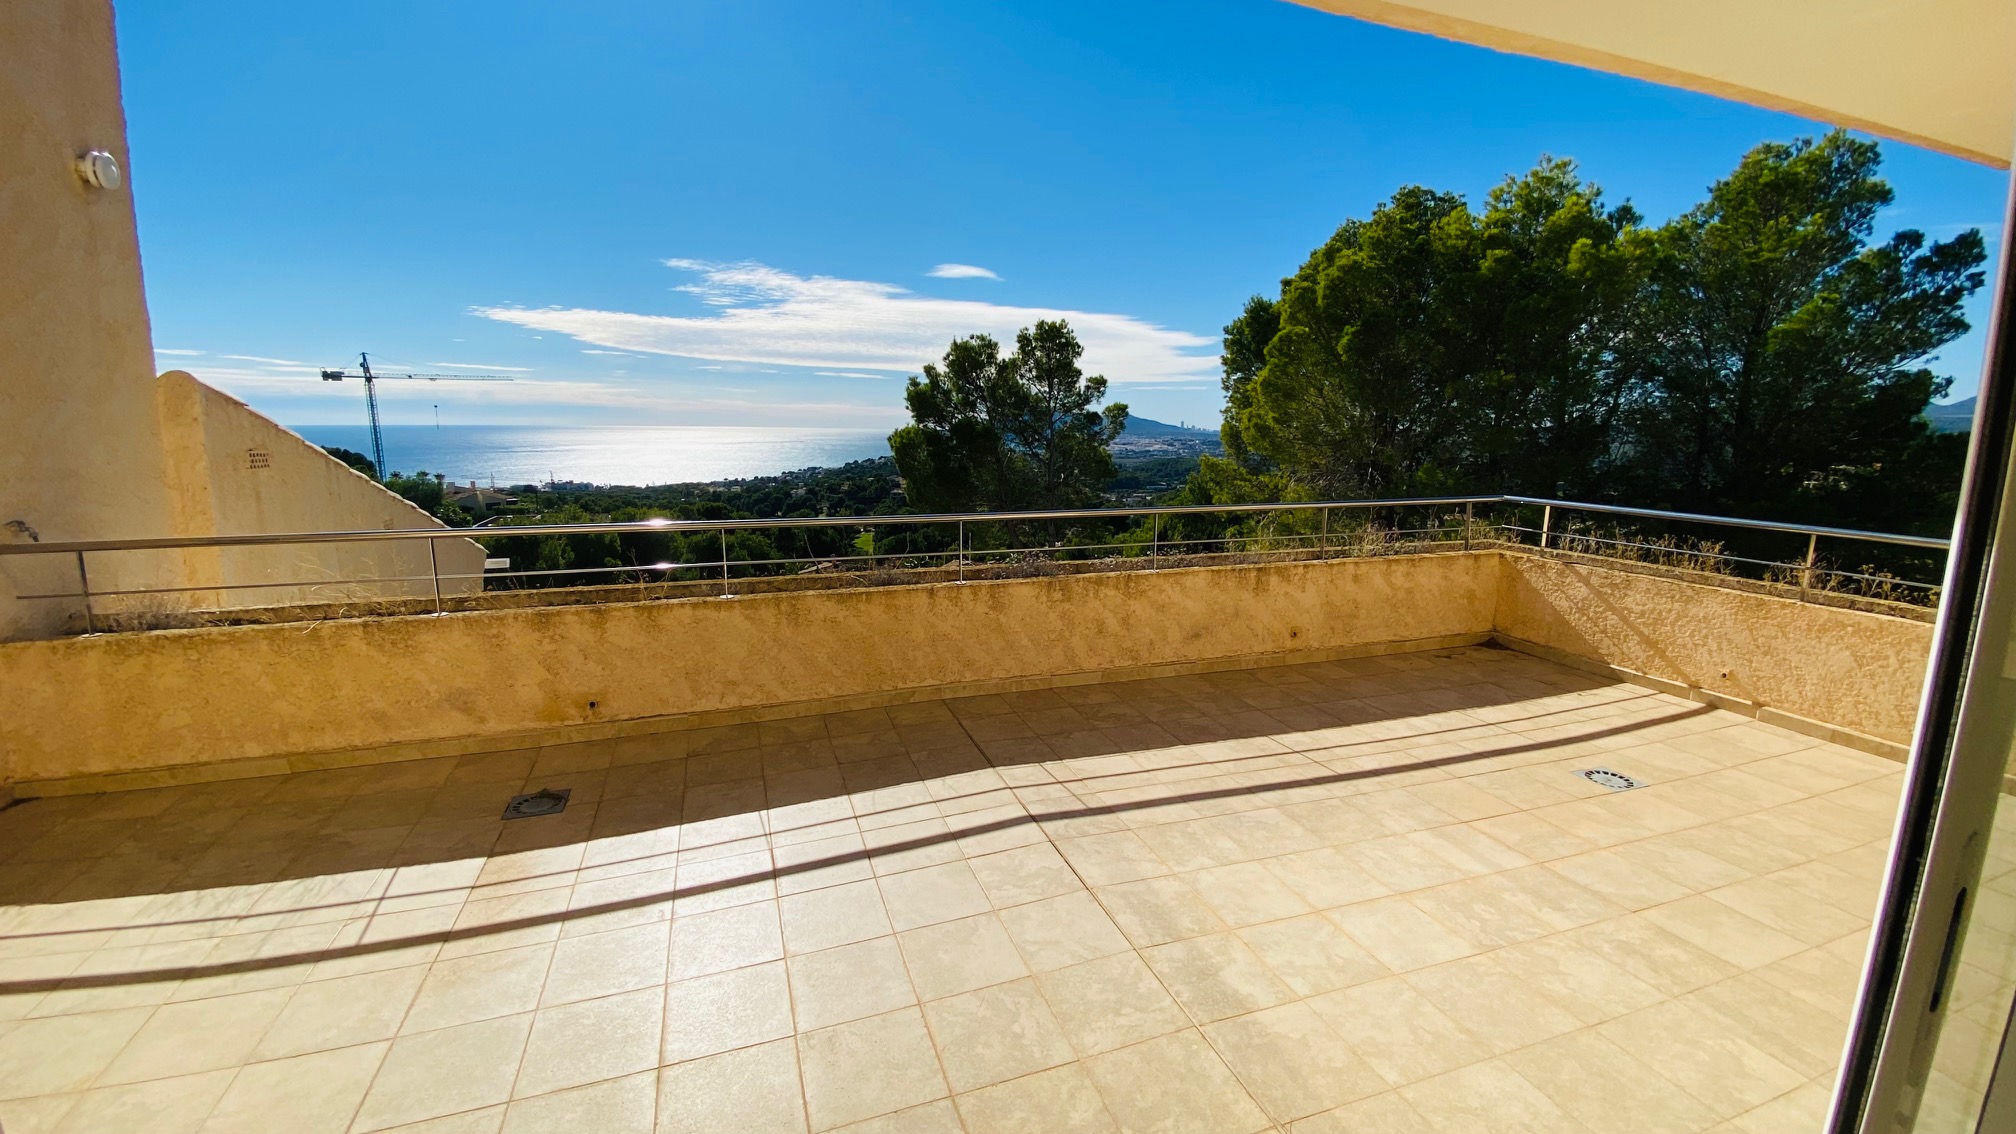 Spectacular Apartment for Sale in the Sierra de Altea: Unparalleled Views and Unforgettable Living Spaces